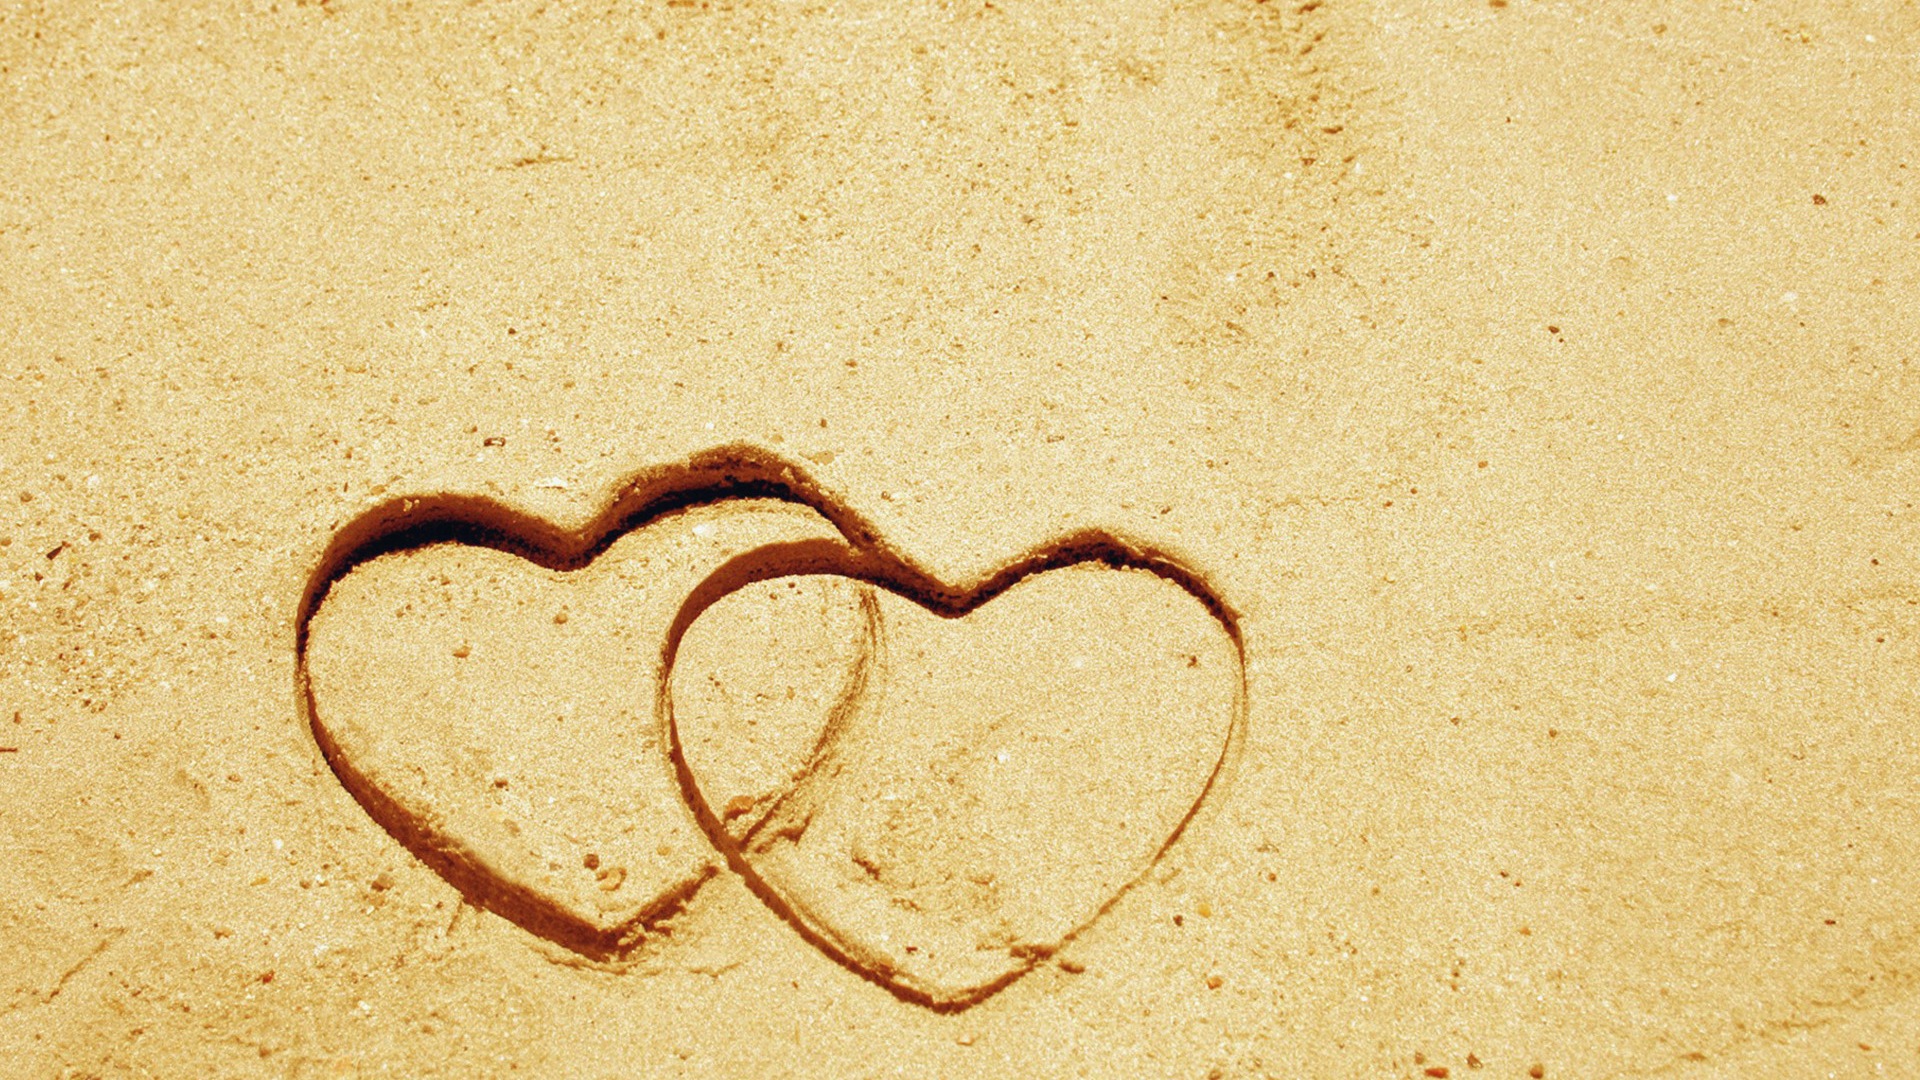 The theme of love, creative heart-shaped HD wallpapers #15 - 1920x1080